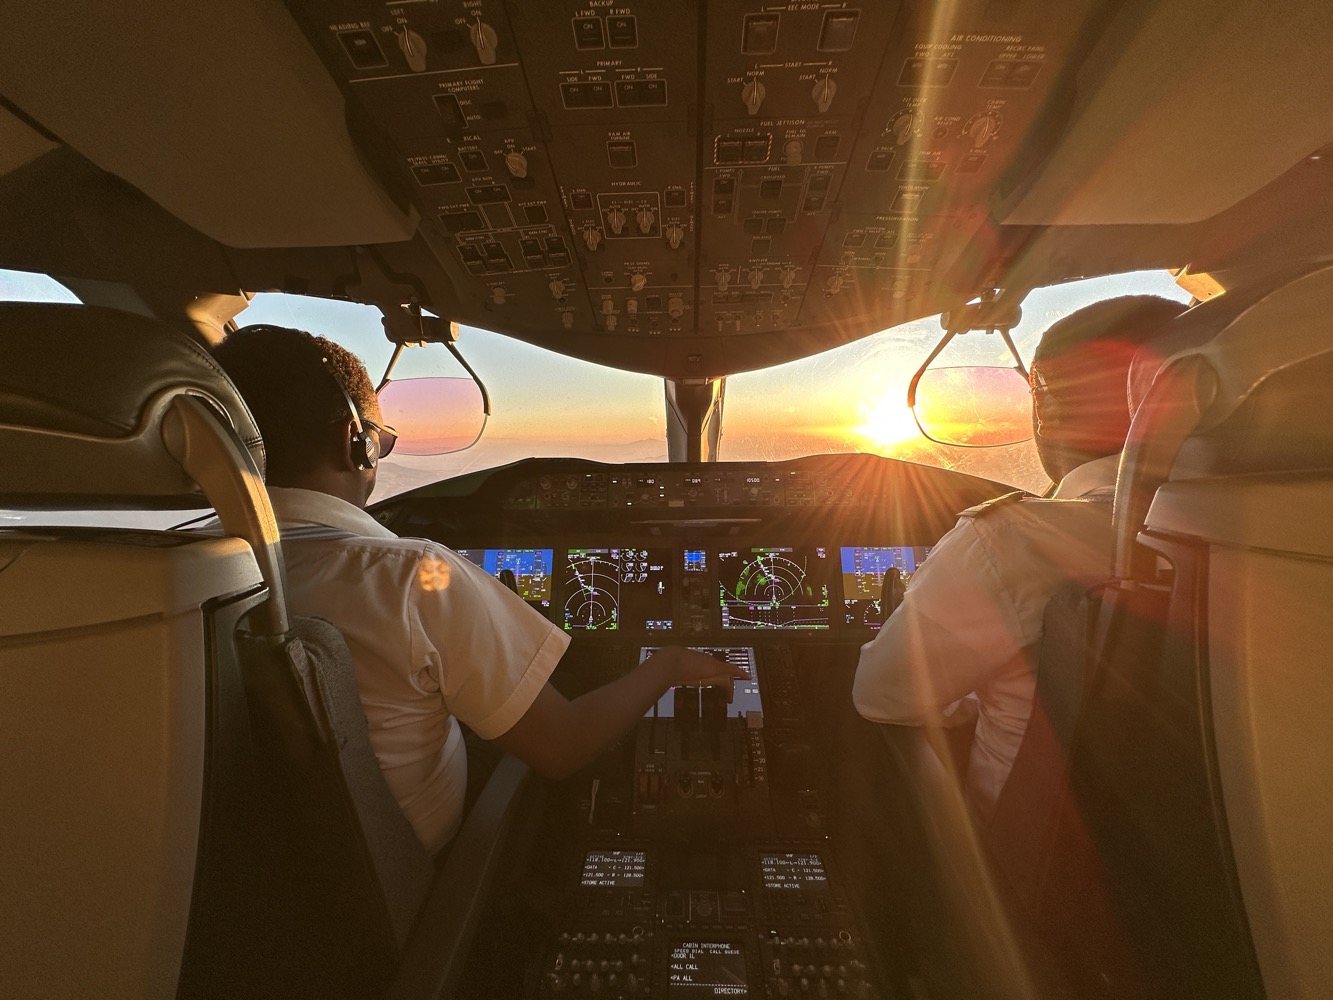 people in the cockpit of an airplane